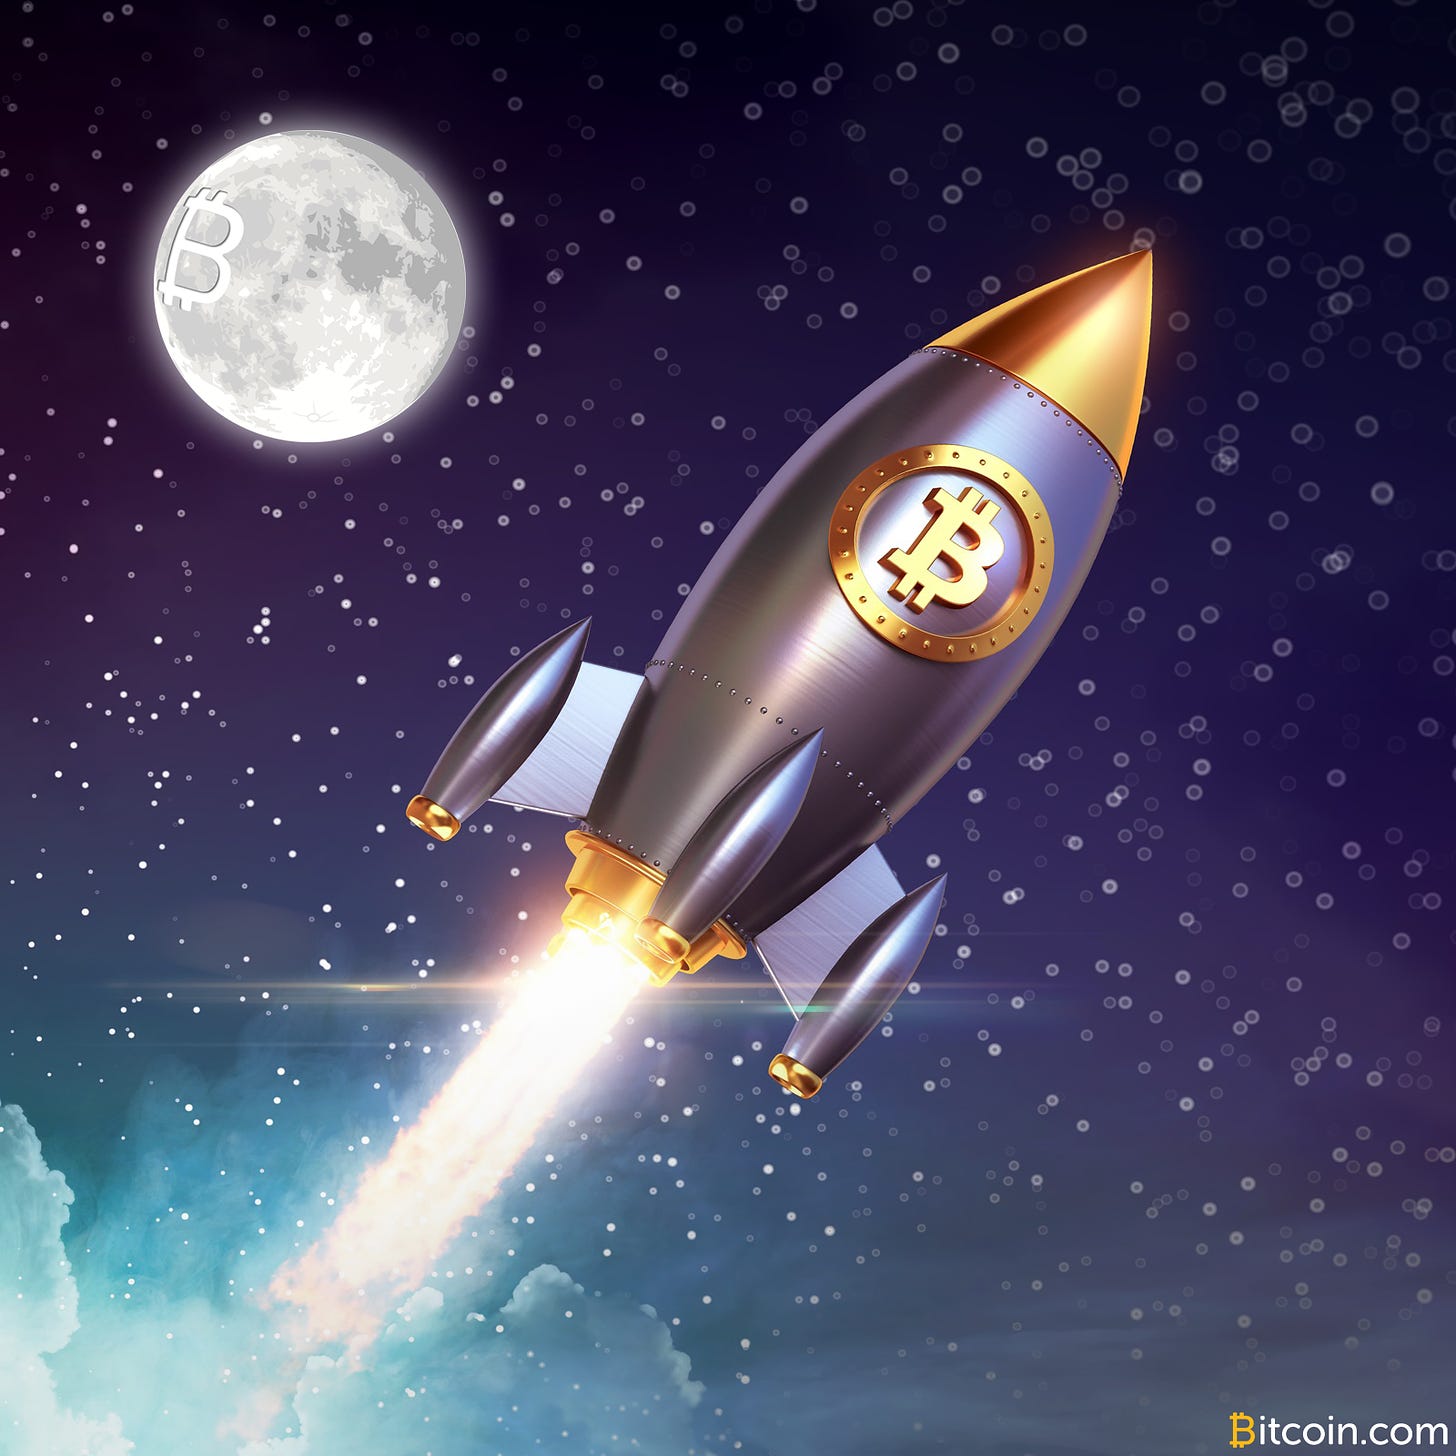 Markets Update: Bitcoin Skyrockets to $4650 Setting New All-Time High –  Markets and Prices Bitcoin News